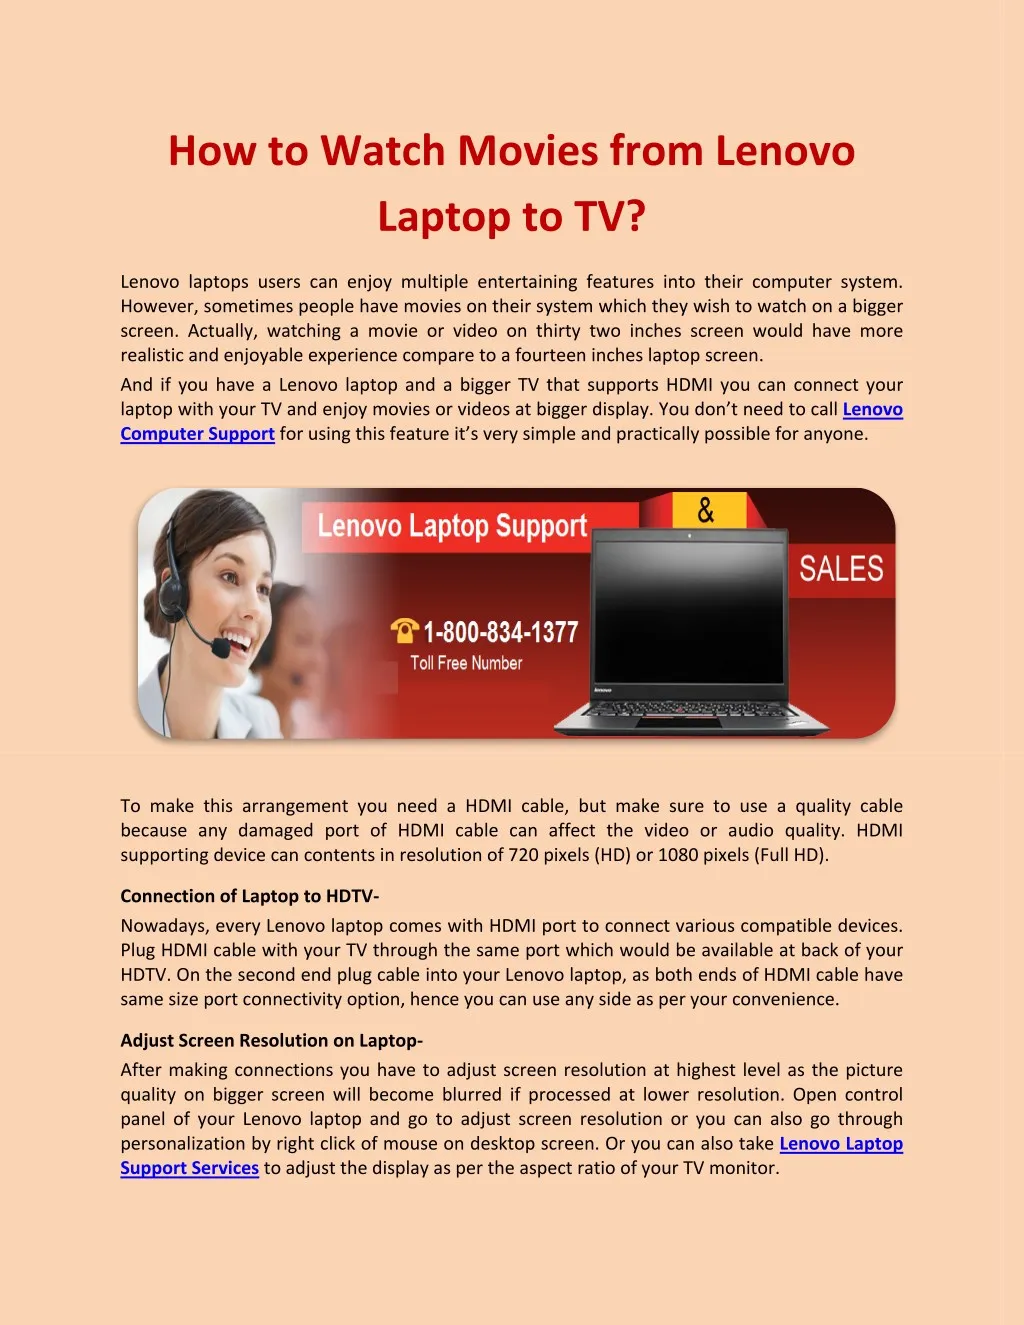 how to watch movies from lenovo laptop to tv